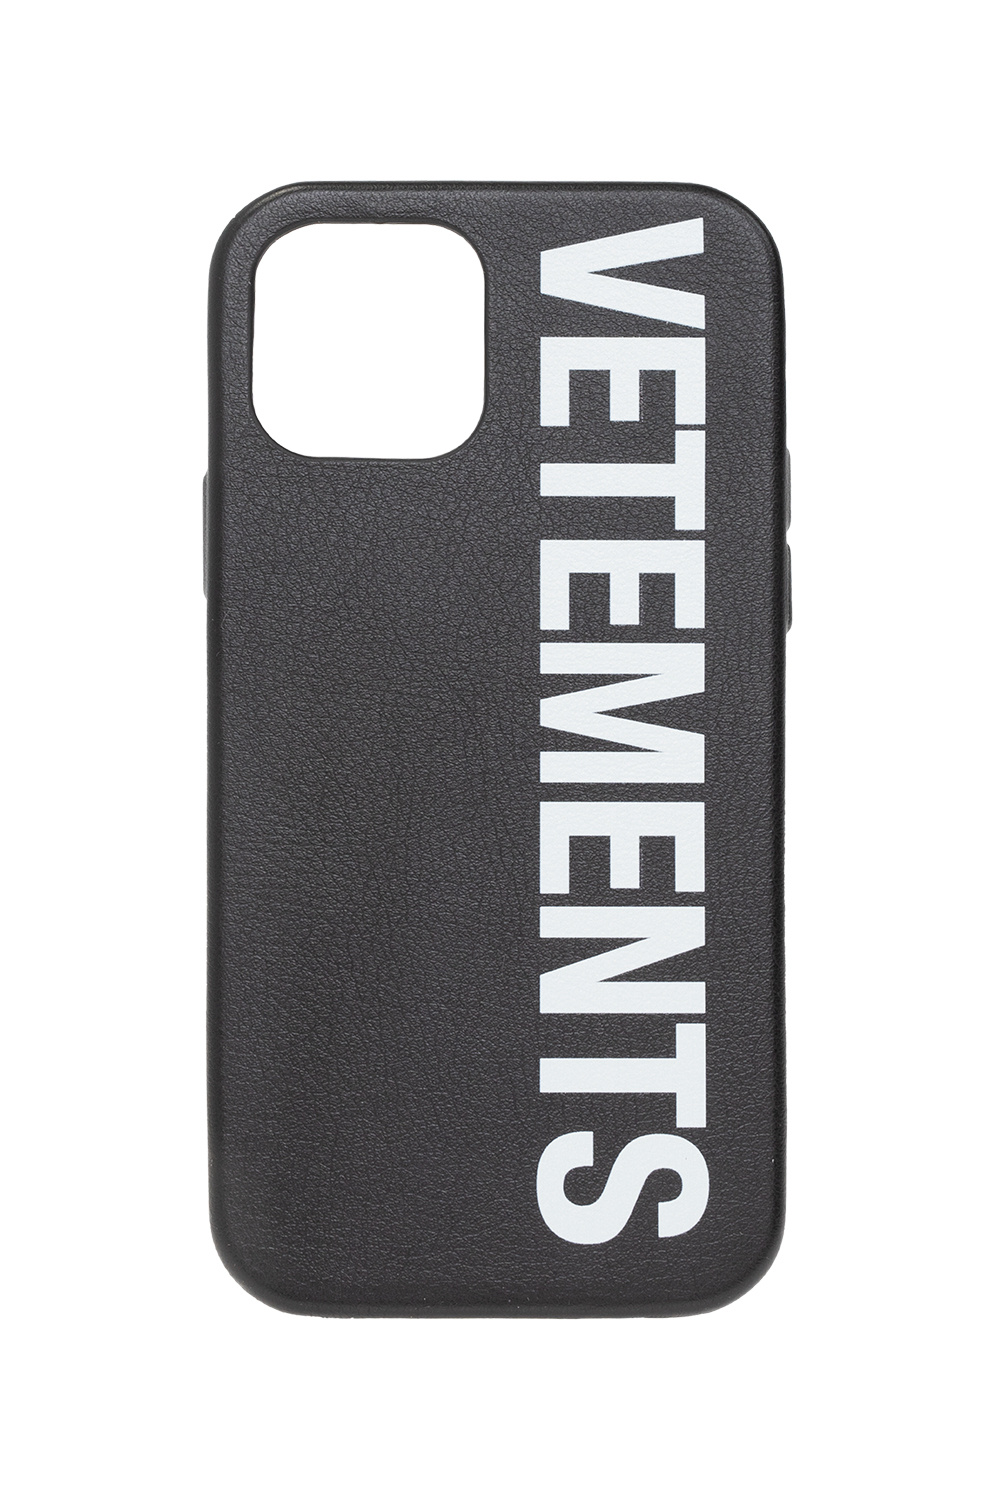 VETEMENTS THE MOST FASHIONABLE BAG MODELS FOR THIS SEASON